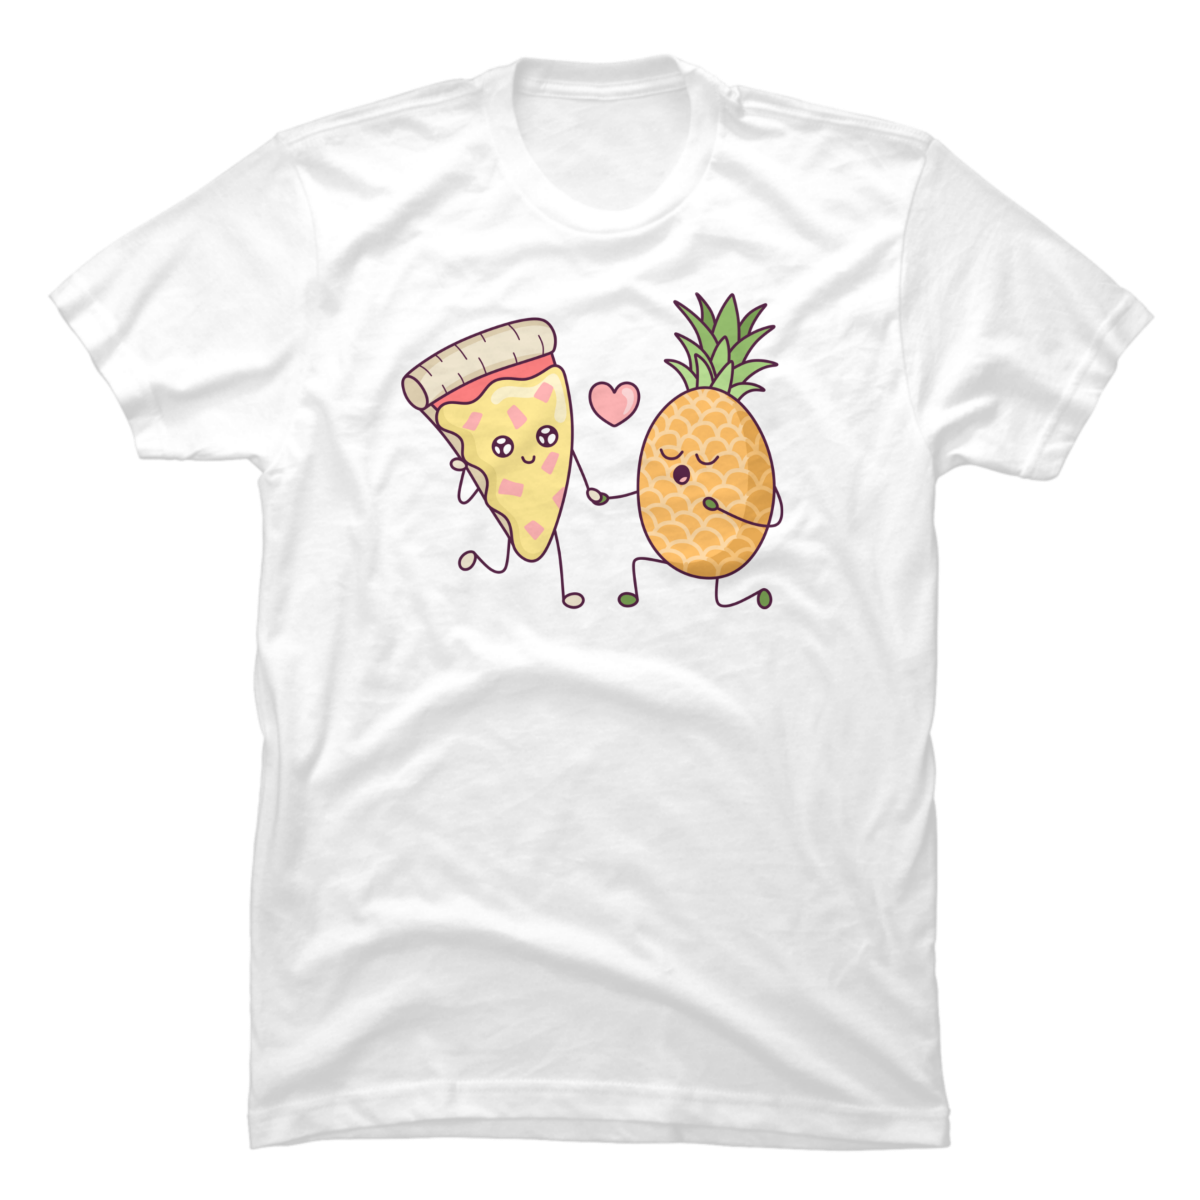 pineapple and pizza shirt